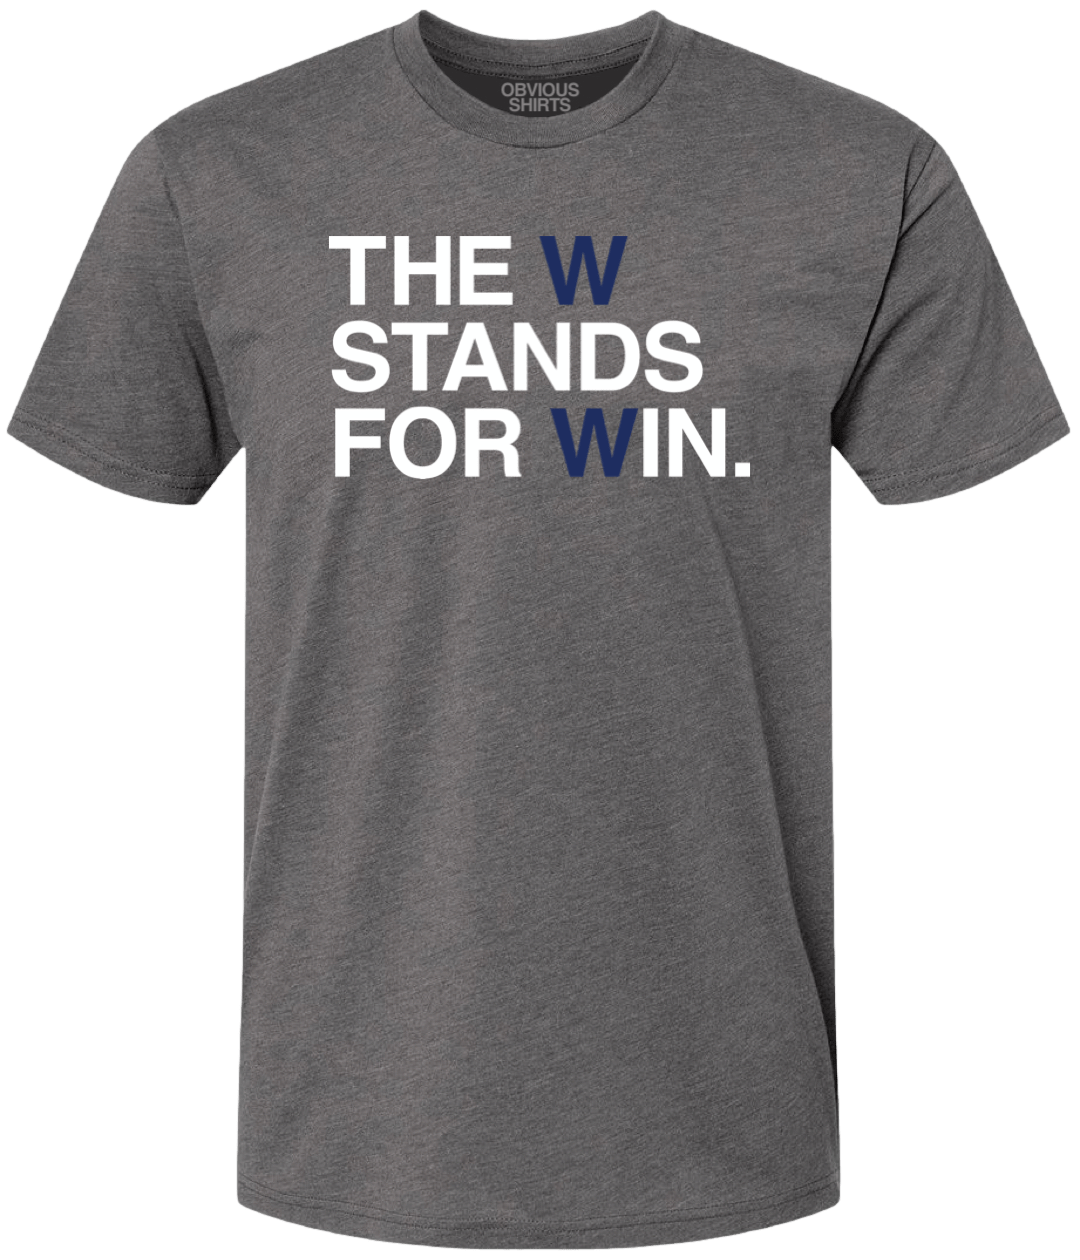 THE W STANDS FOR WIN. (METAL GREY) - OBVIOUS SHIRTS